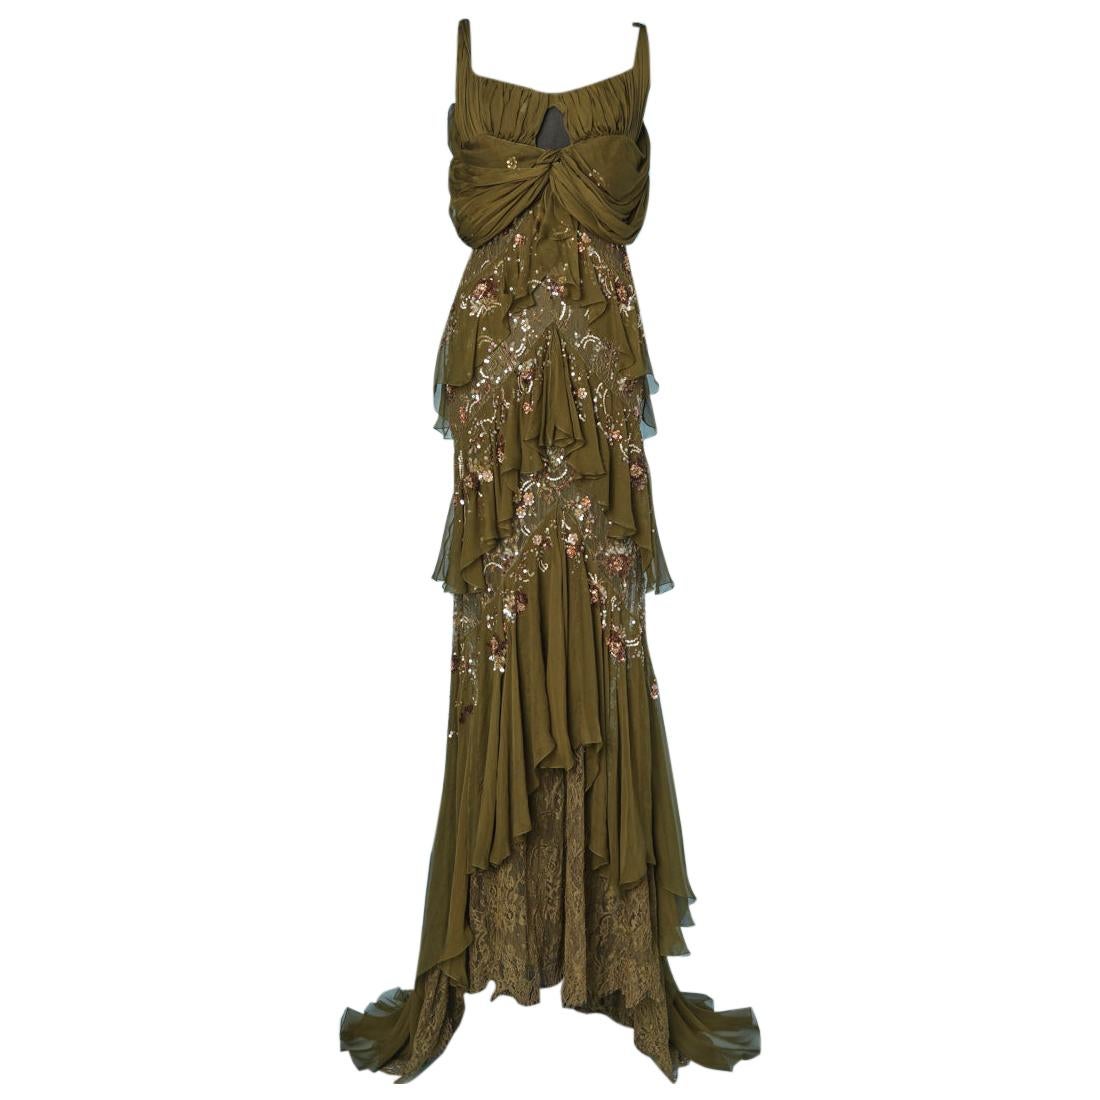 Evening gown in pearl sequined lace chiffon long dress by John Galliano